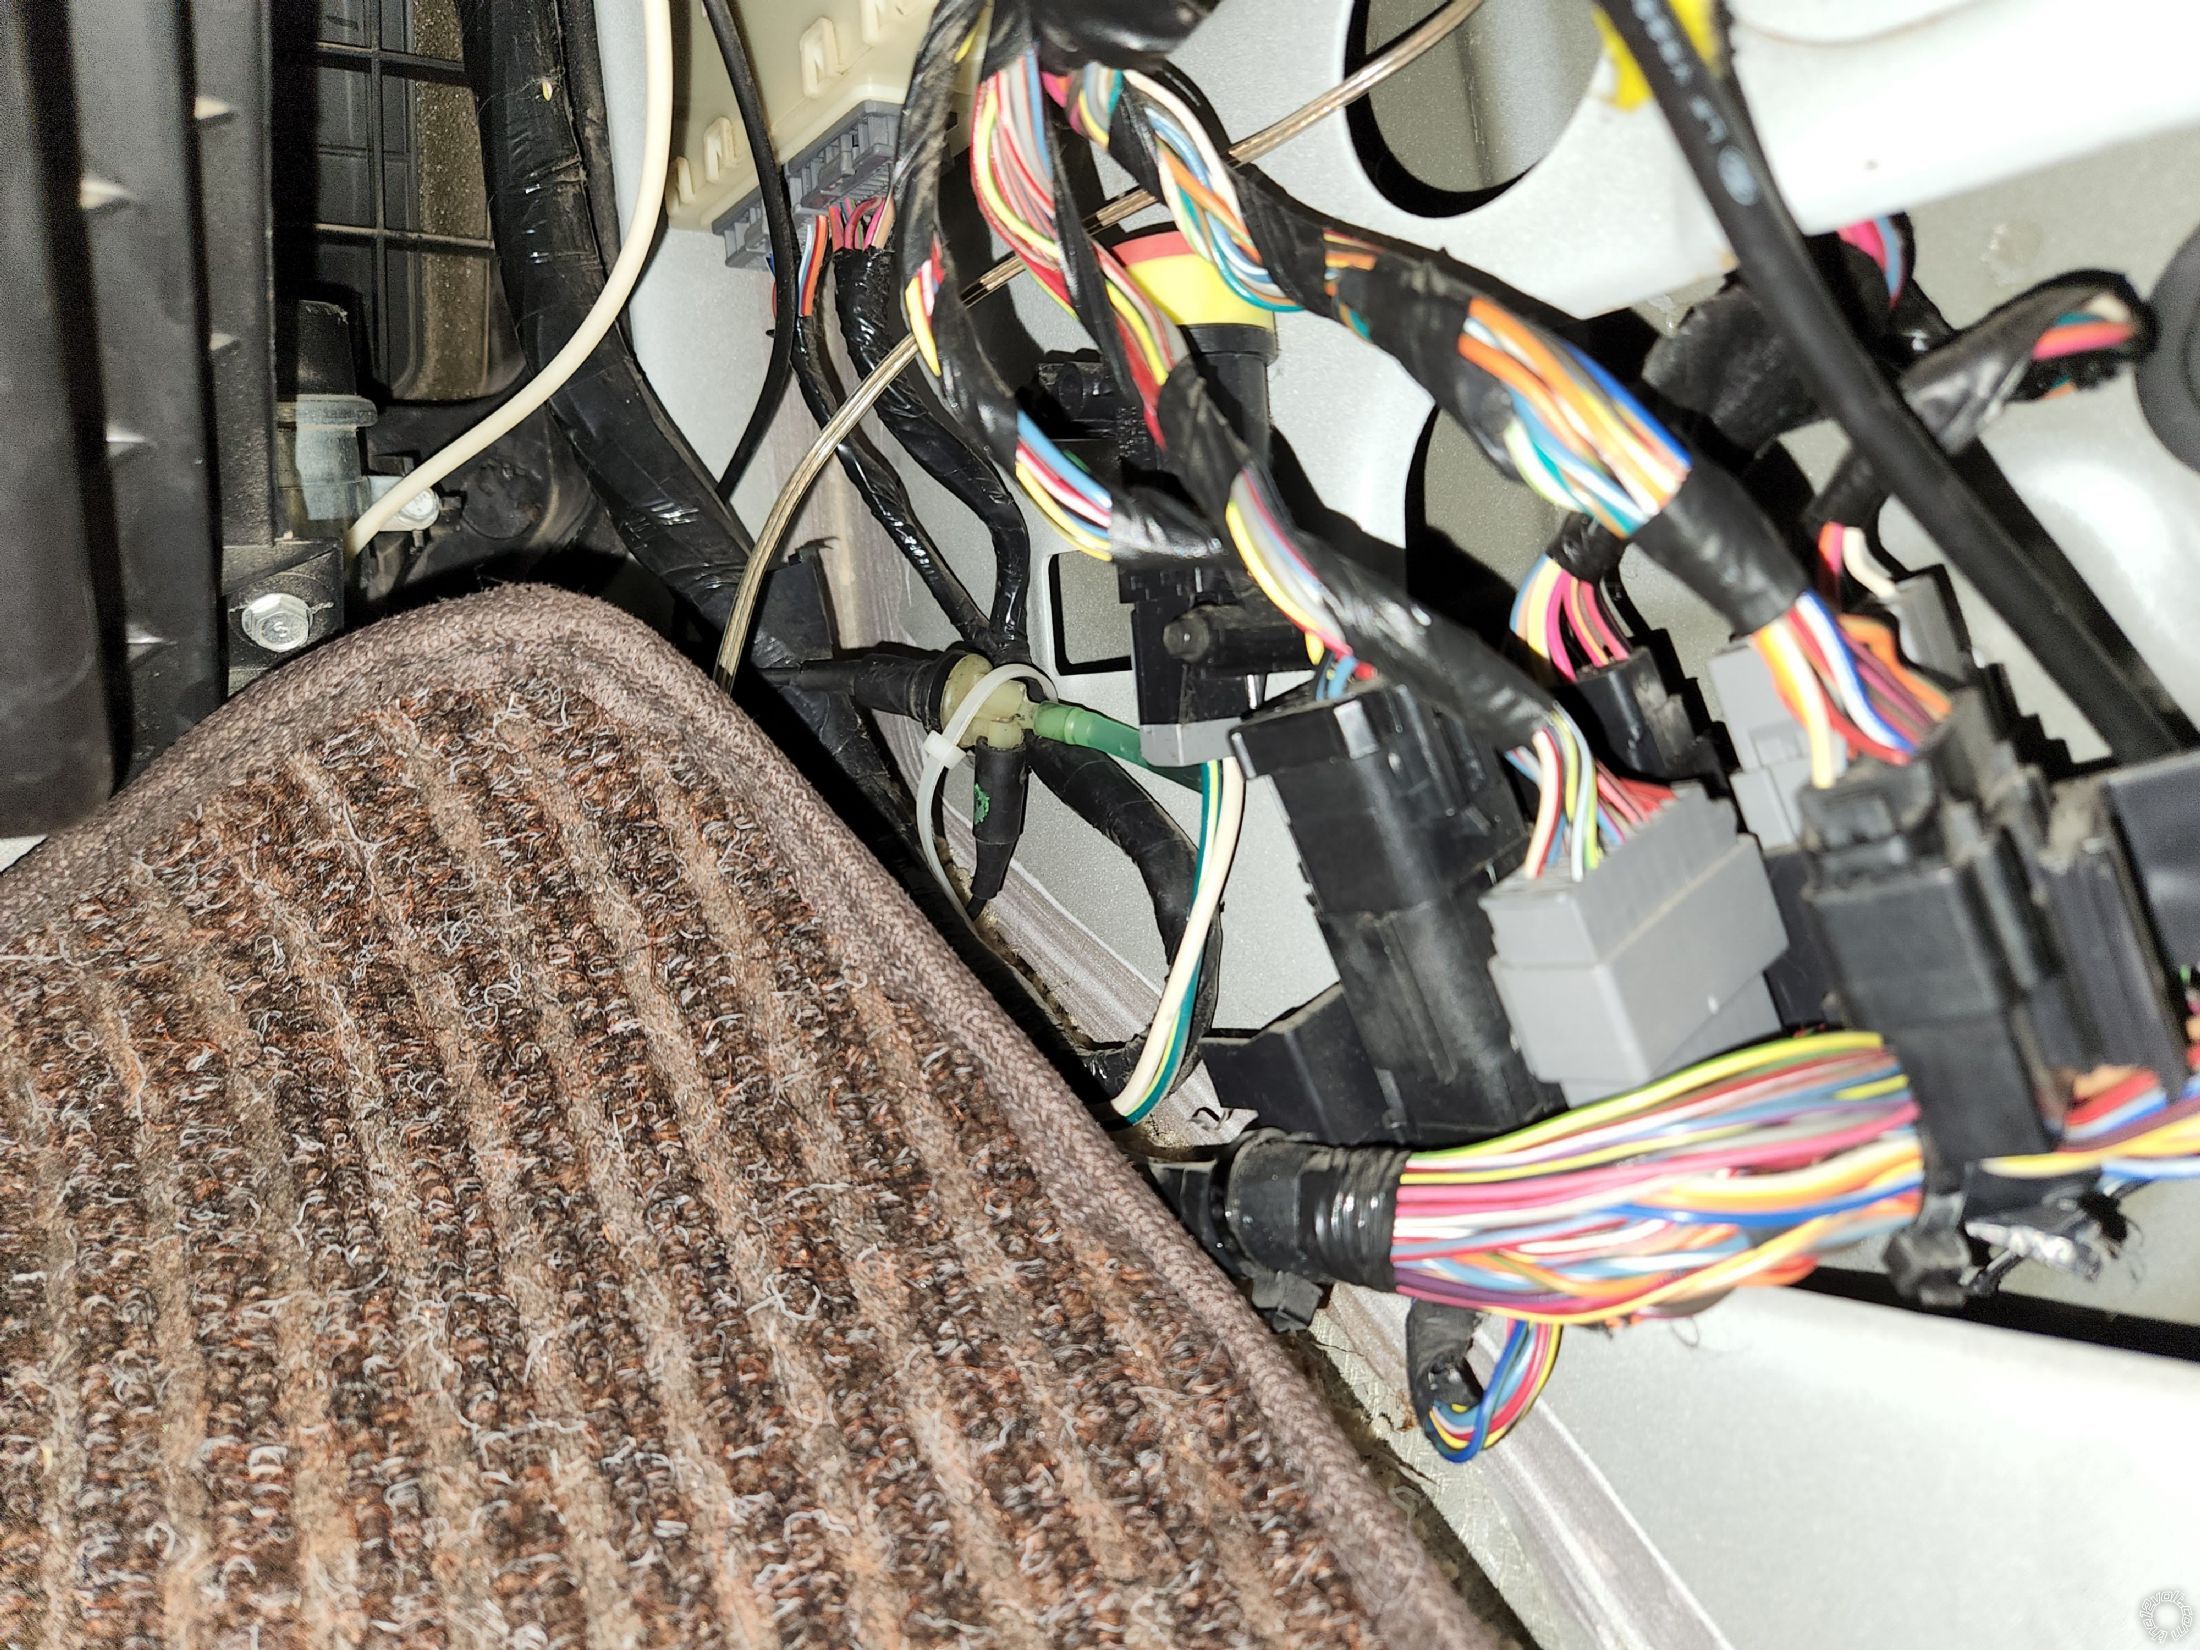 Turn Signal Wires, 2006 Ford E-450 -- posted image.